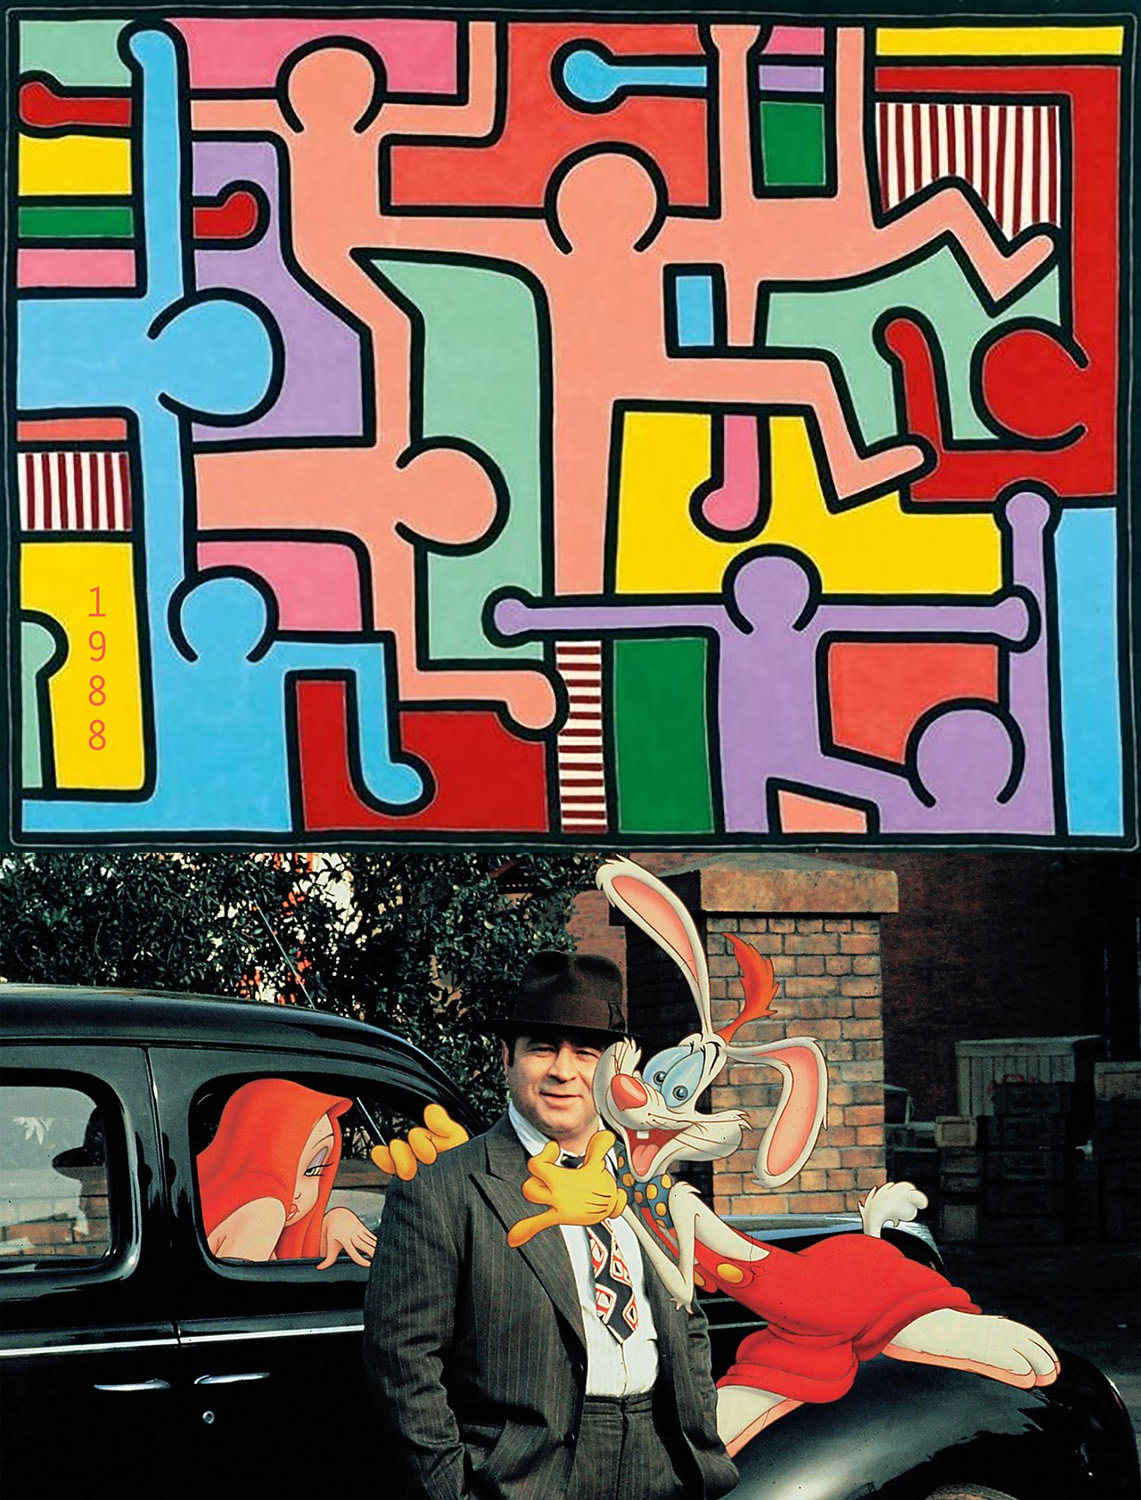 1988, Who Framed Roger Rabbit – Keith Haring, Untitled, 2018, Archival Pigment Print, 61.6 x 48 in.